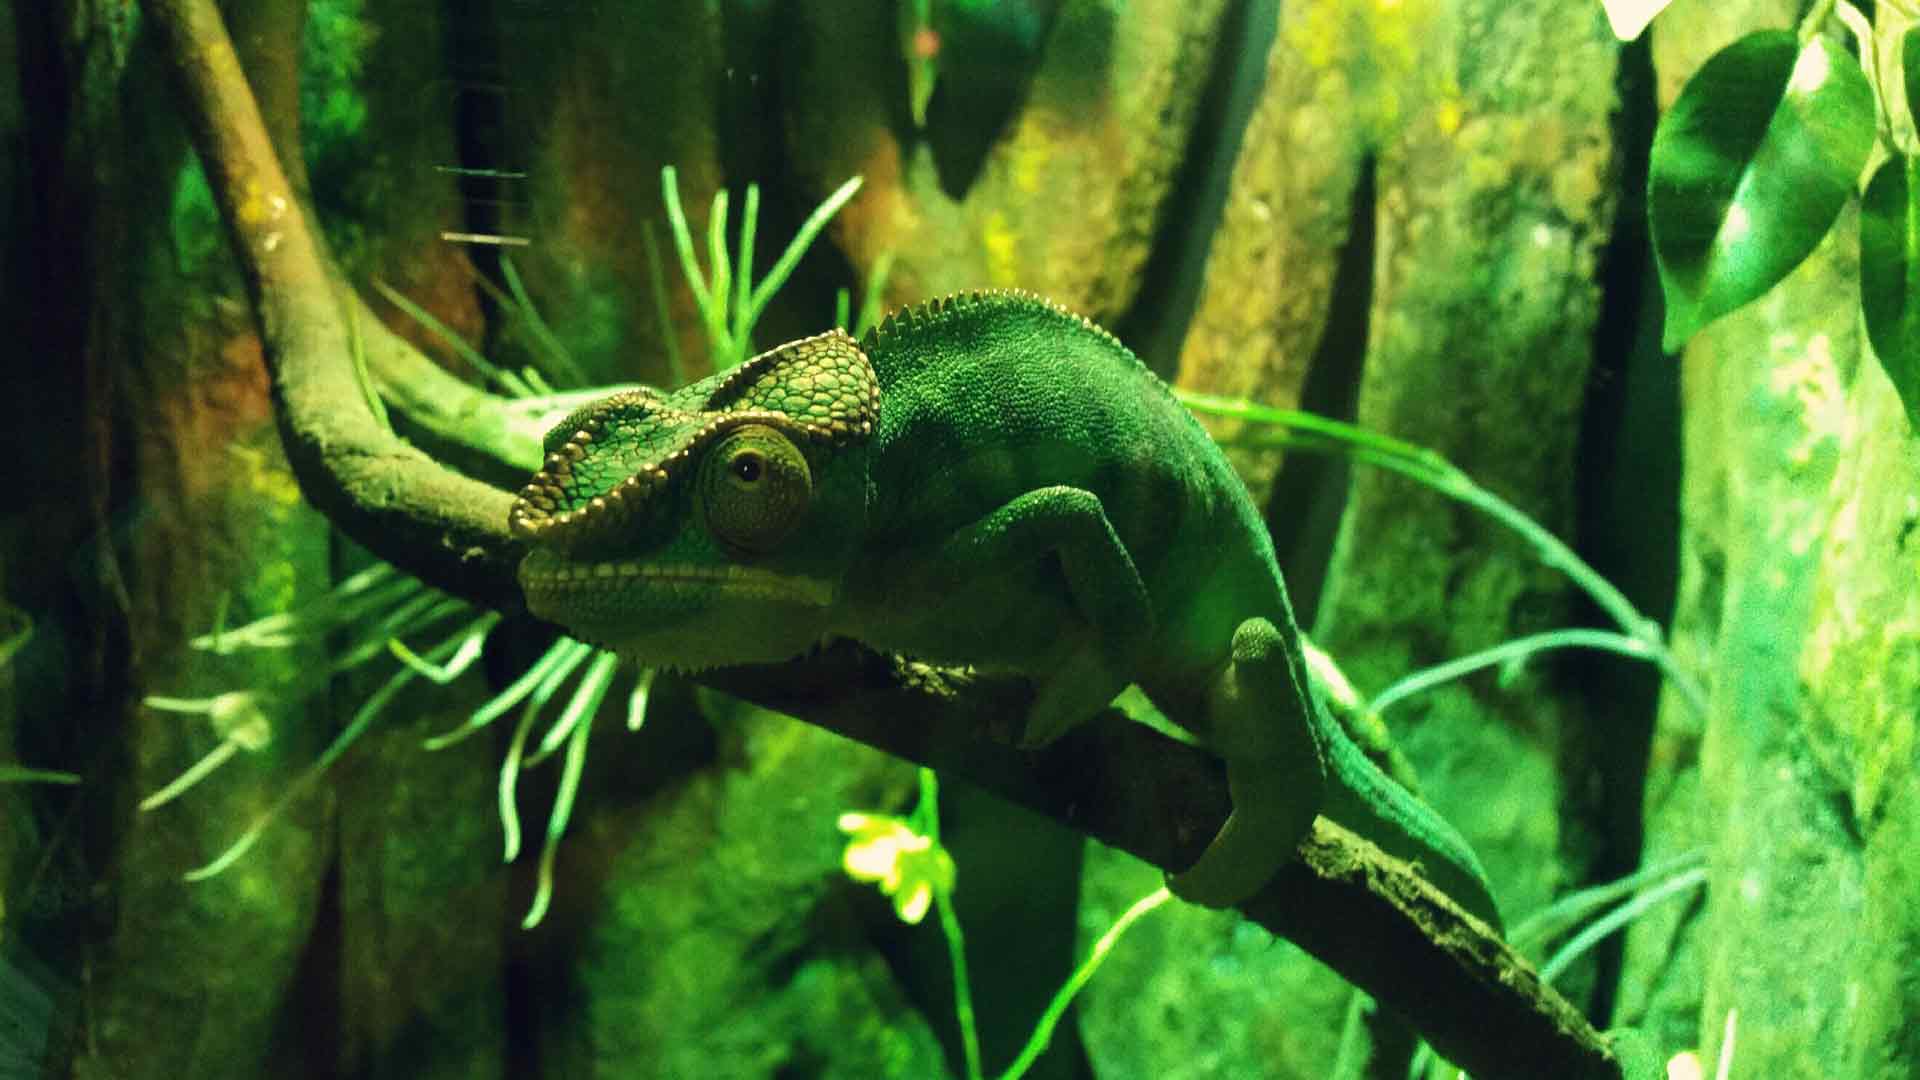 A green chameleon blending in with a forest background, intended to symbolise adaptability.